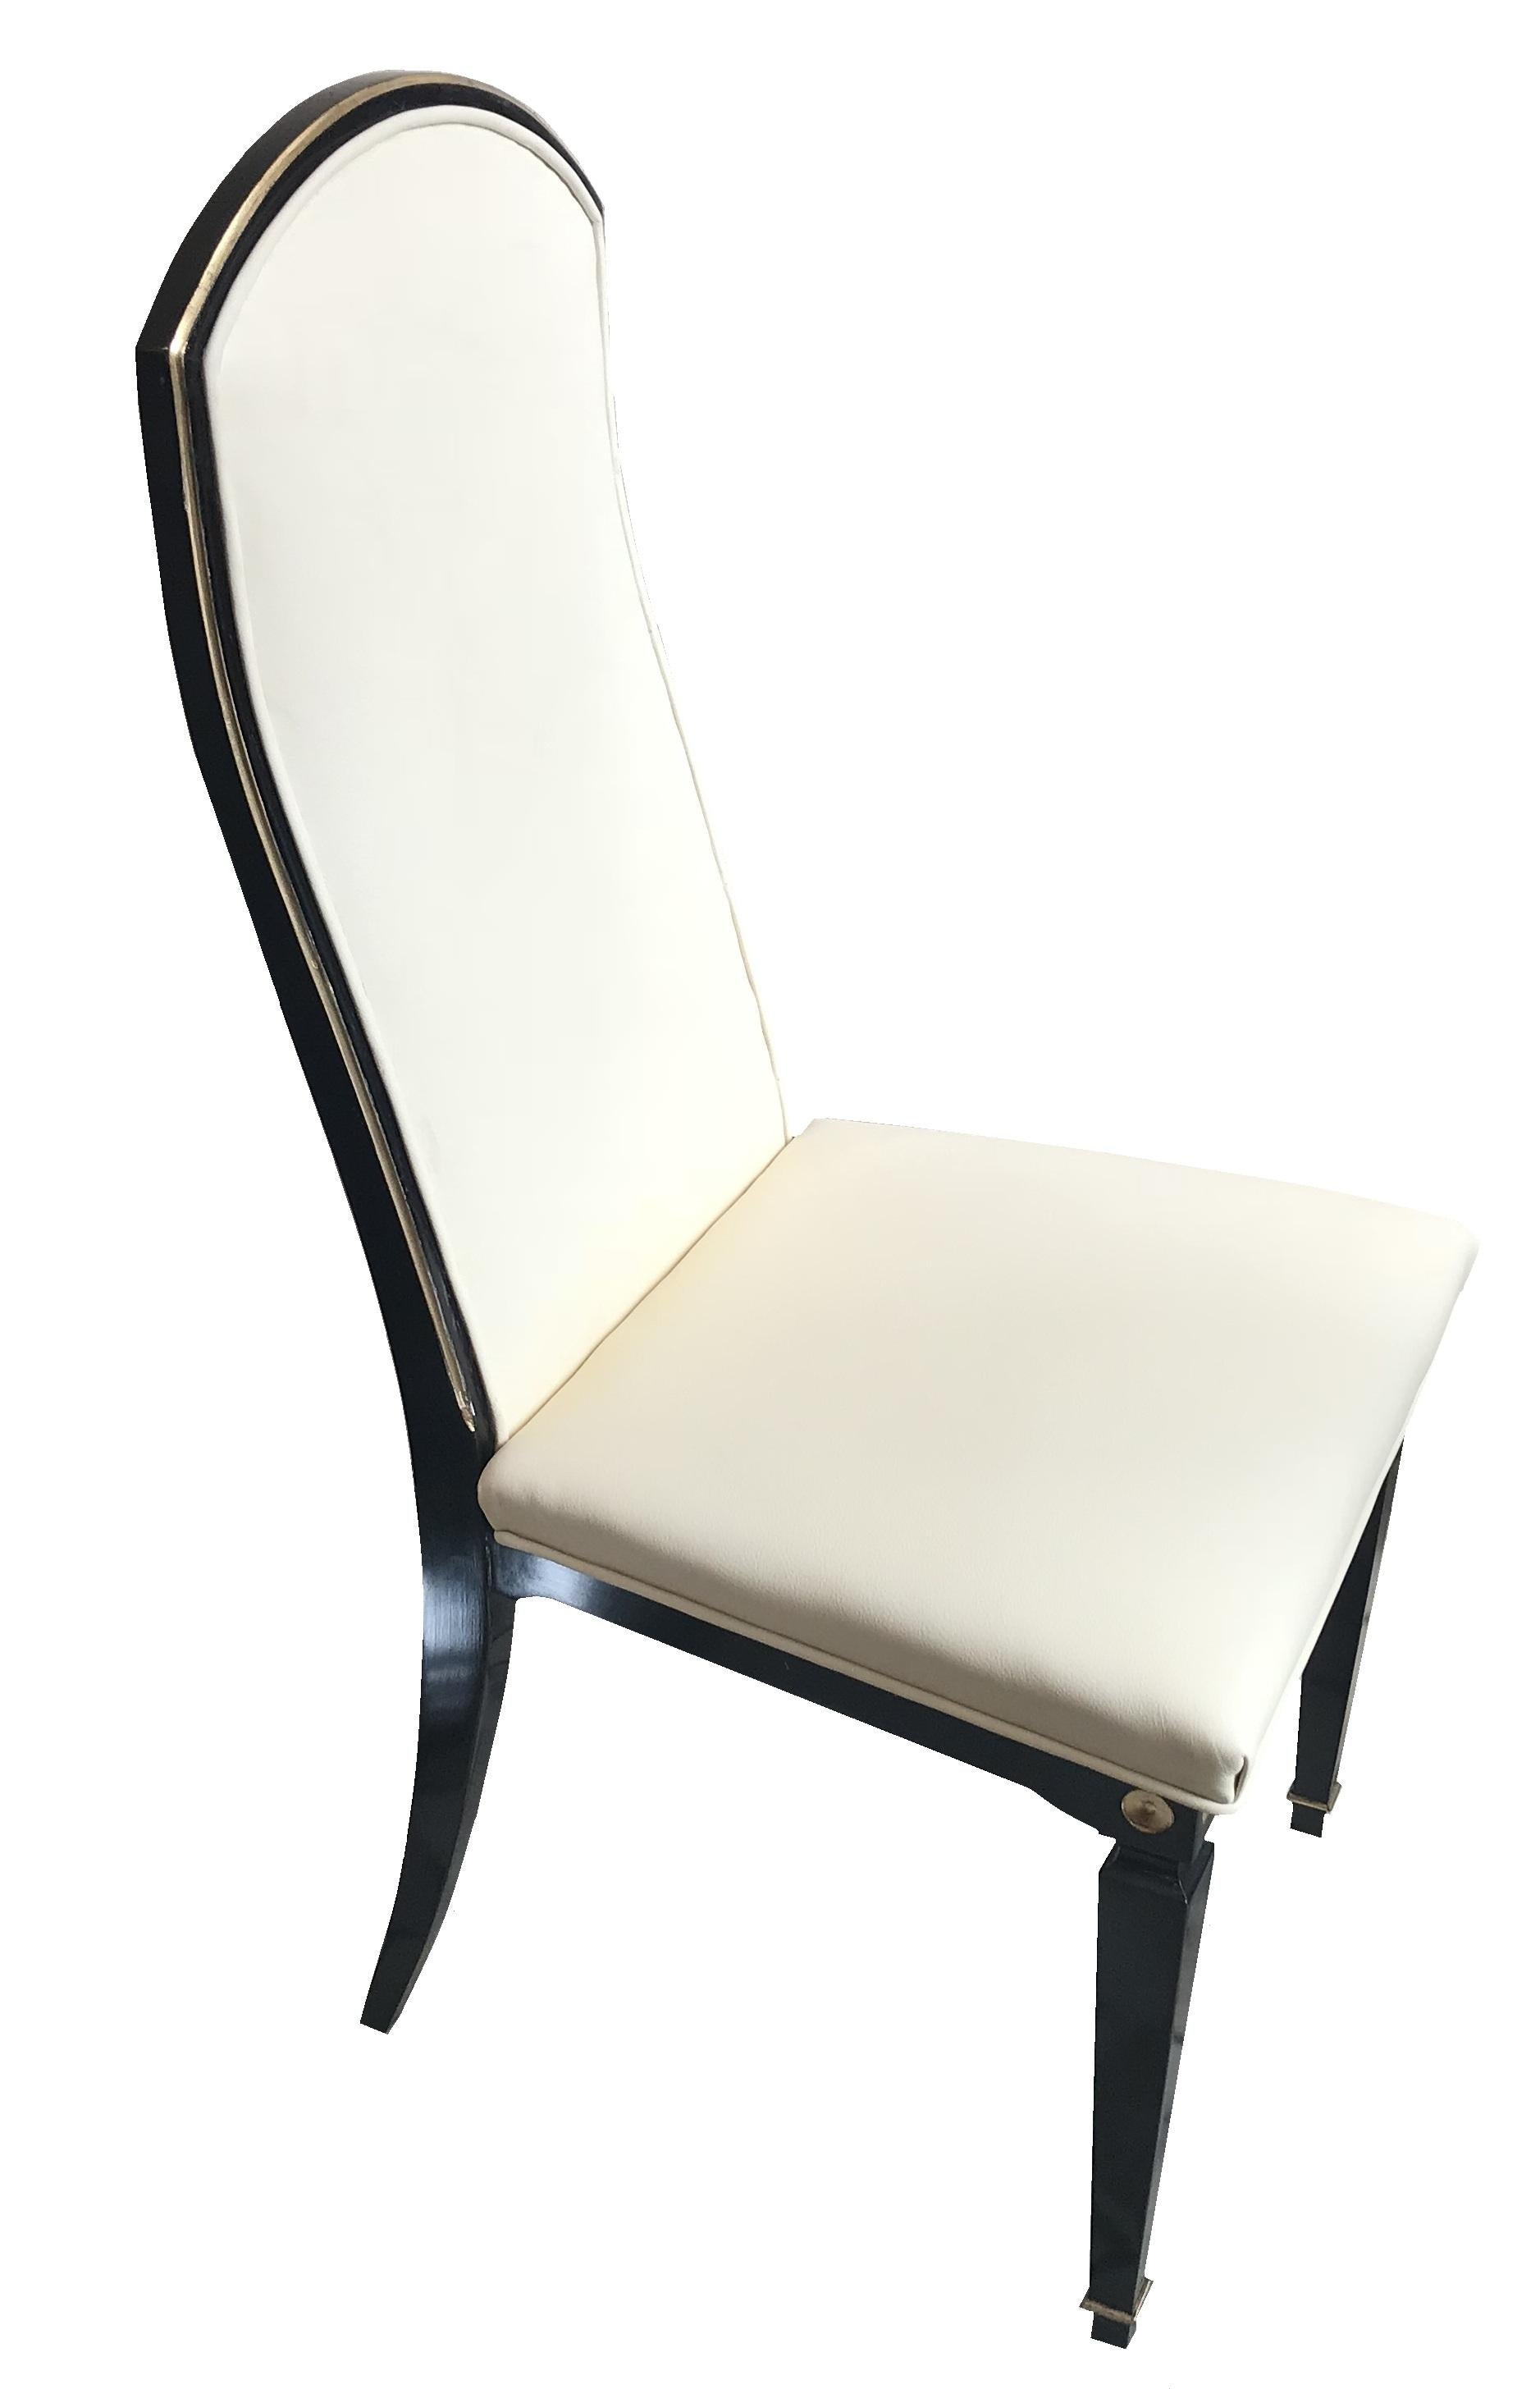 Luxury 12 Art Deco chairs in leather and wood.

Year 1930
Country: French
Materials : wood and leather
Finish: polyurethanic lacquer
Elegant and sophisticated 12 chairs.
You want to live in the golden years, these are the chairs your project